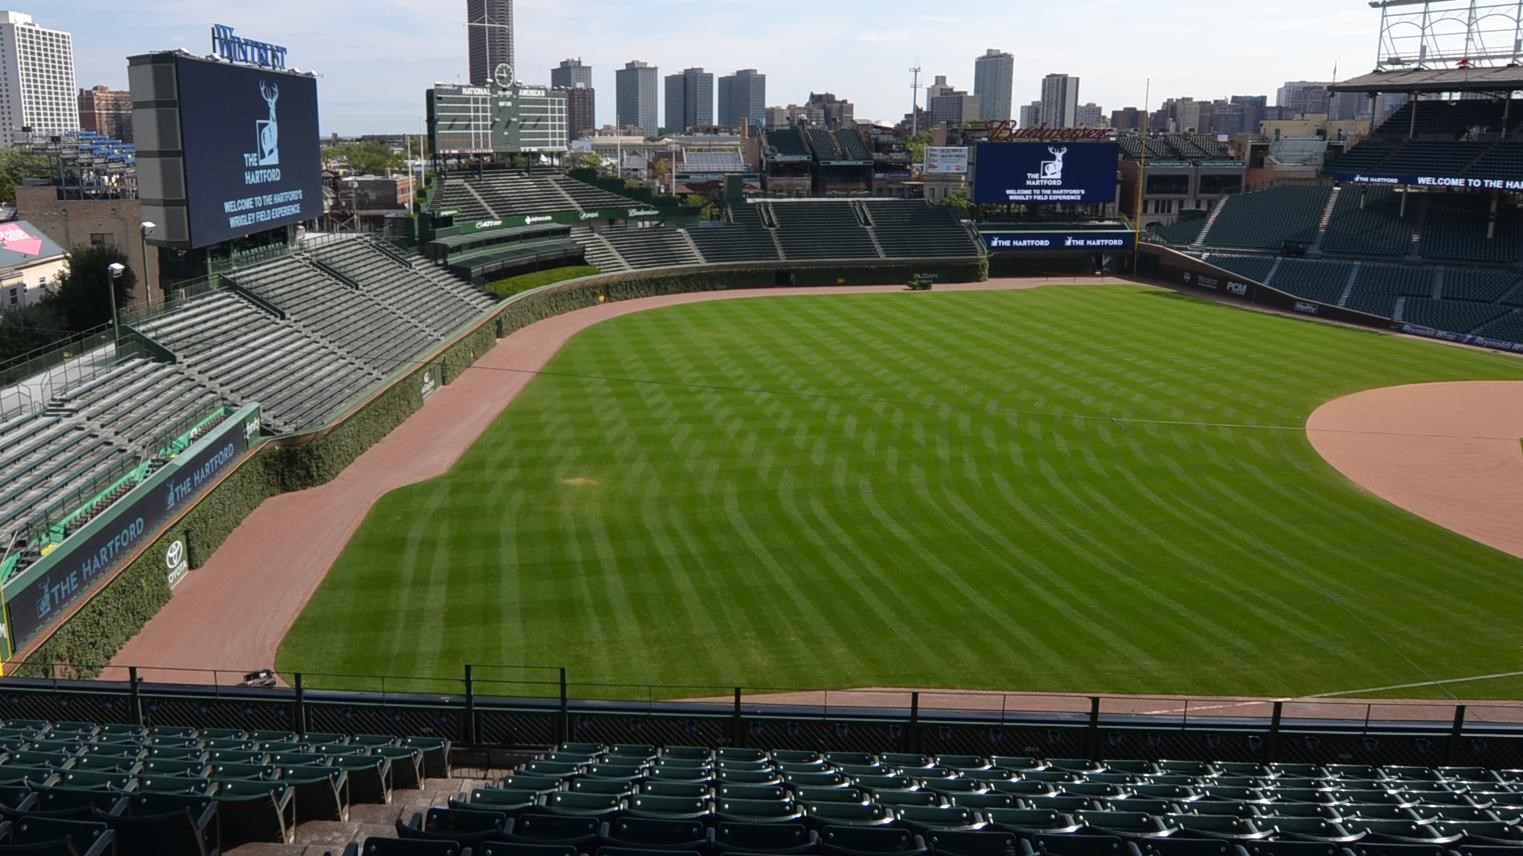 Wrigley Field, showing empty stadium and the ivy wall